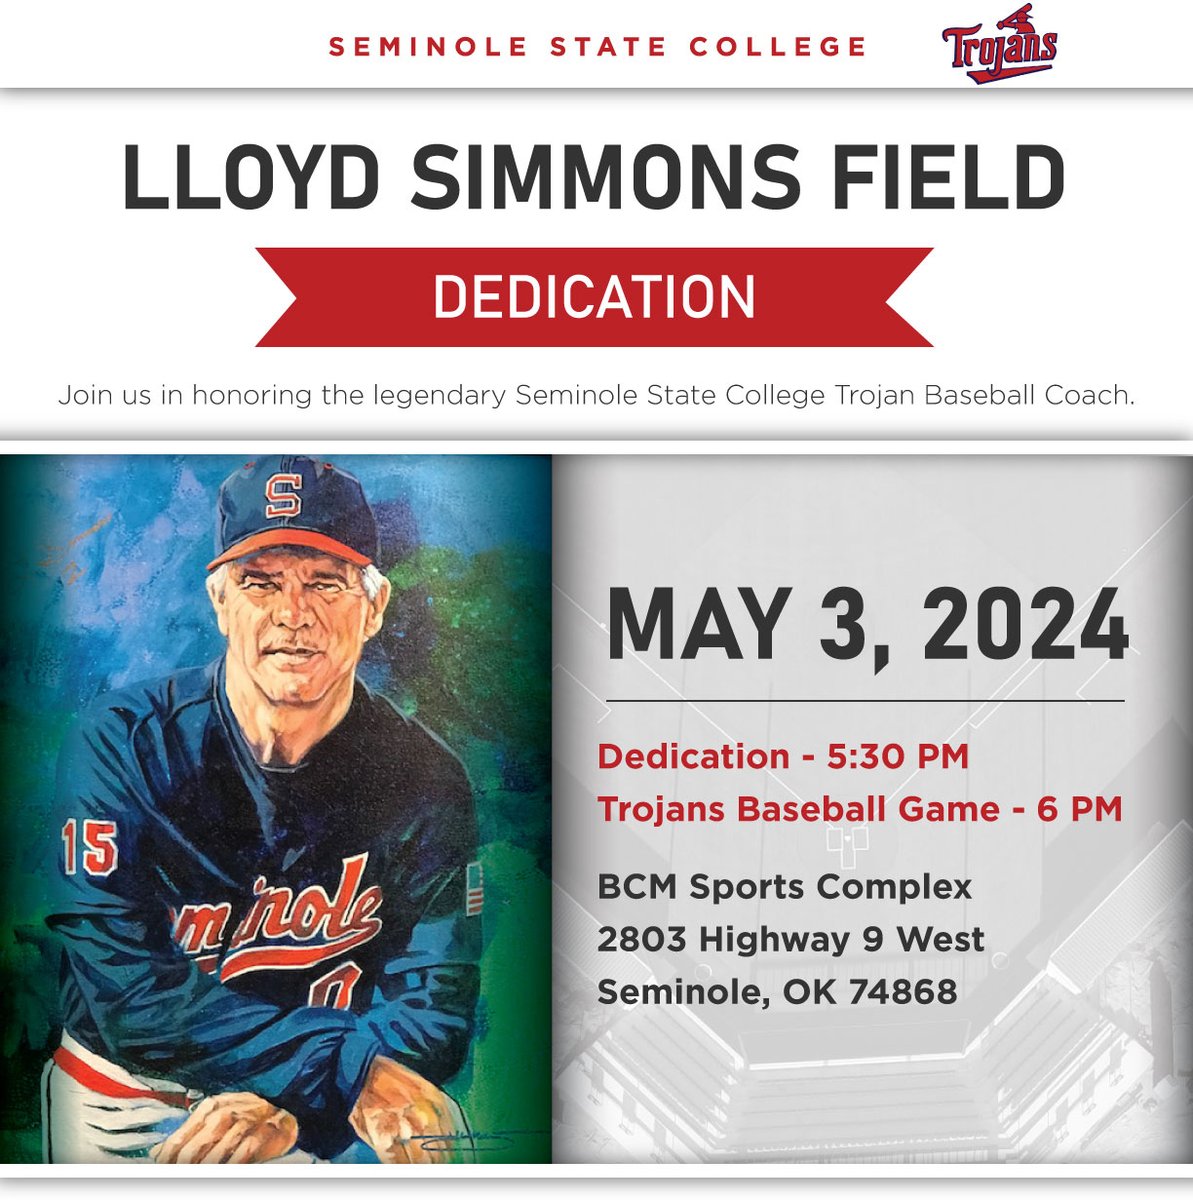 Join us as we host the dedication ceremony of Lloyd Simmons Field this afternoon at 5:30 p.m. at the BCM Sports Complex. Admission to the field dedication and the subsequent Trojan baseball game at 6:00 p.m. will be free for all attendees. Read More: tinyurl.com/527p5fvh